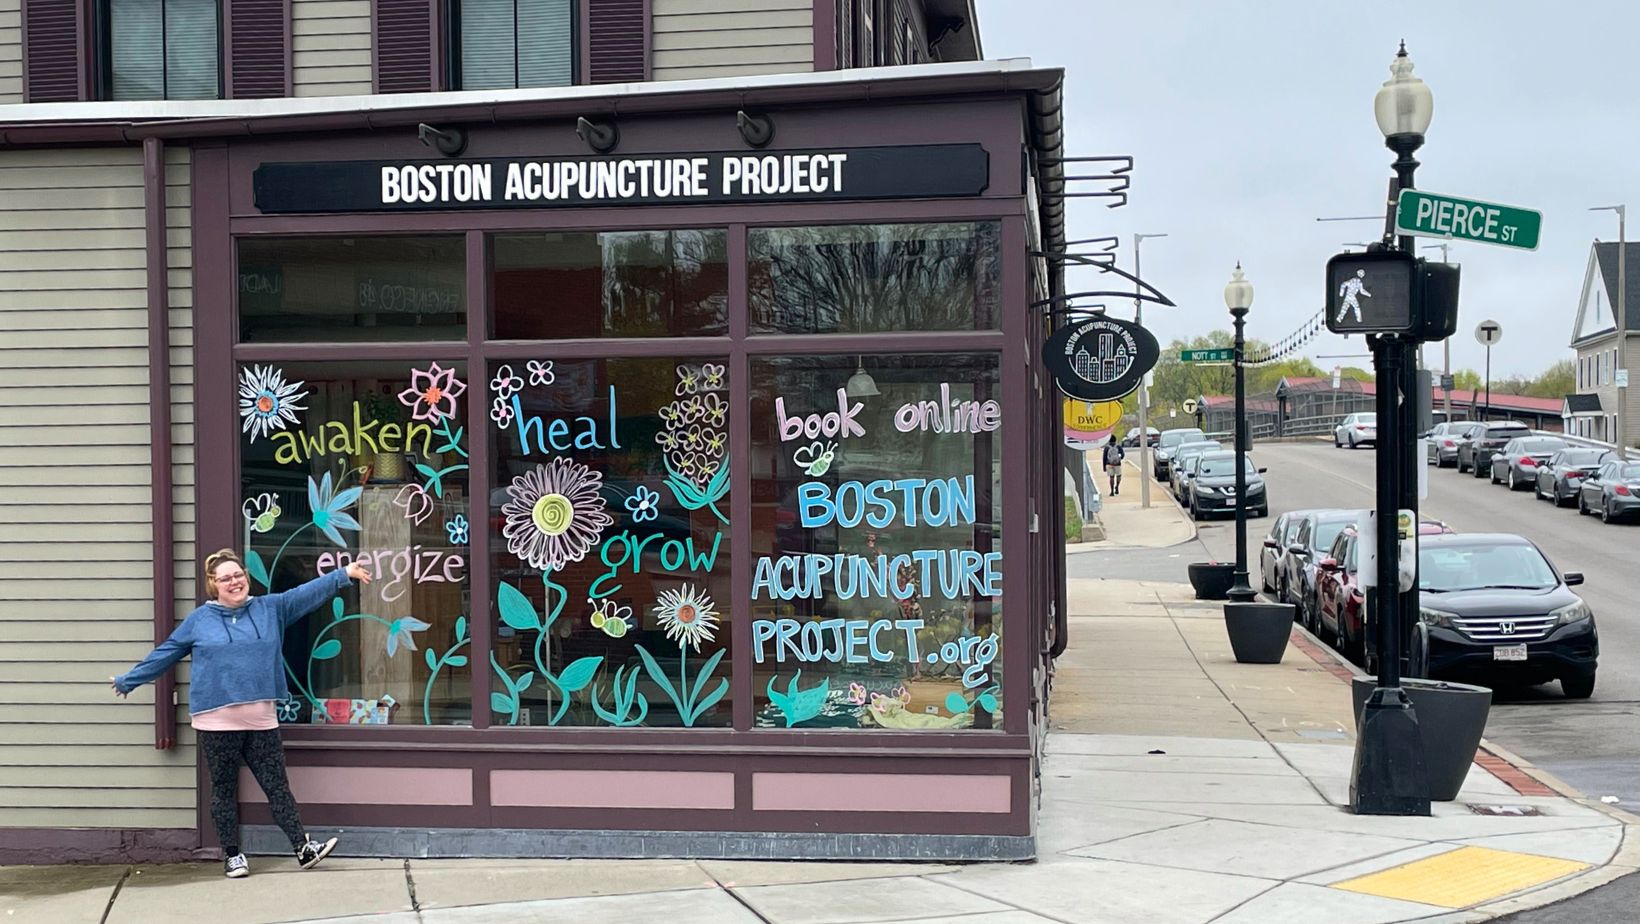 Dee poses in front of the windows at Boston Acupuncture Project which she has painted with flowers and the words awaken, heal, energize, thrive, grow. Book online at Boston Acupuncture Project dot com.